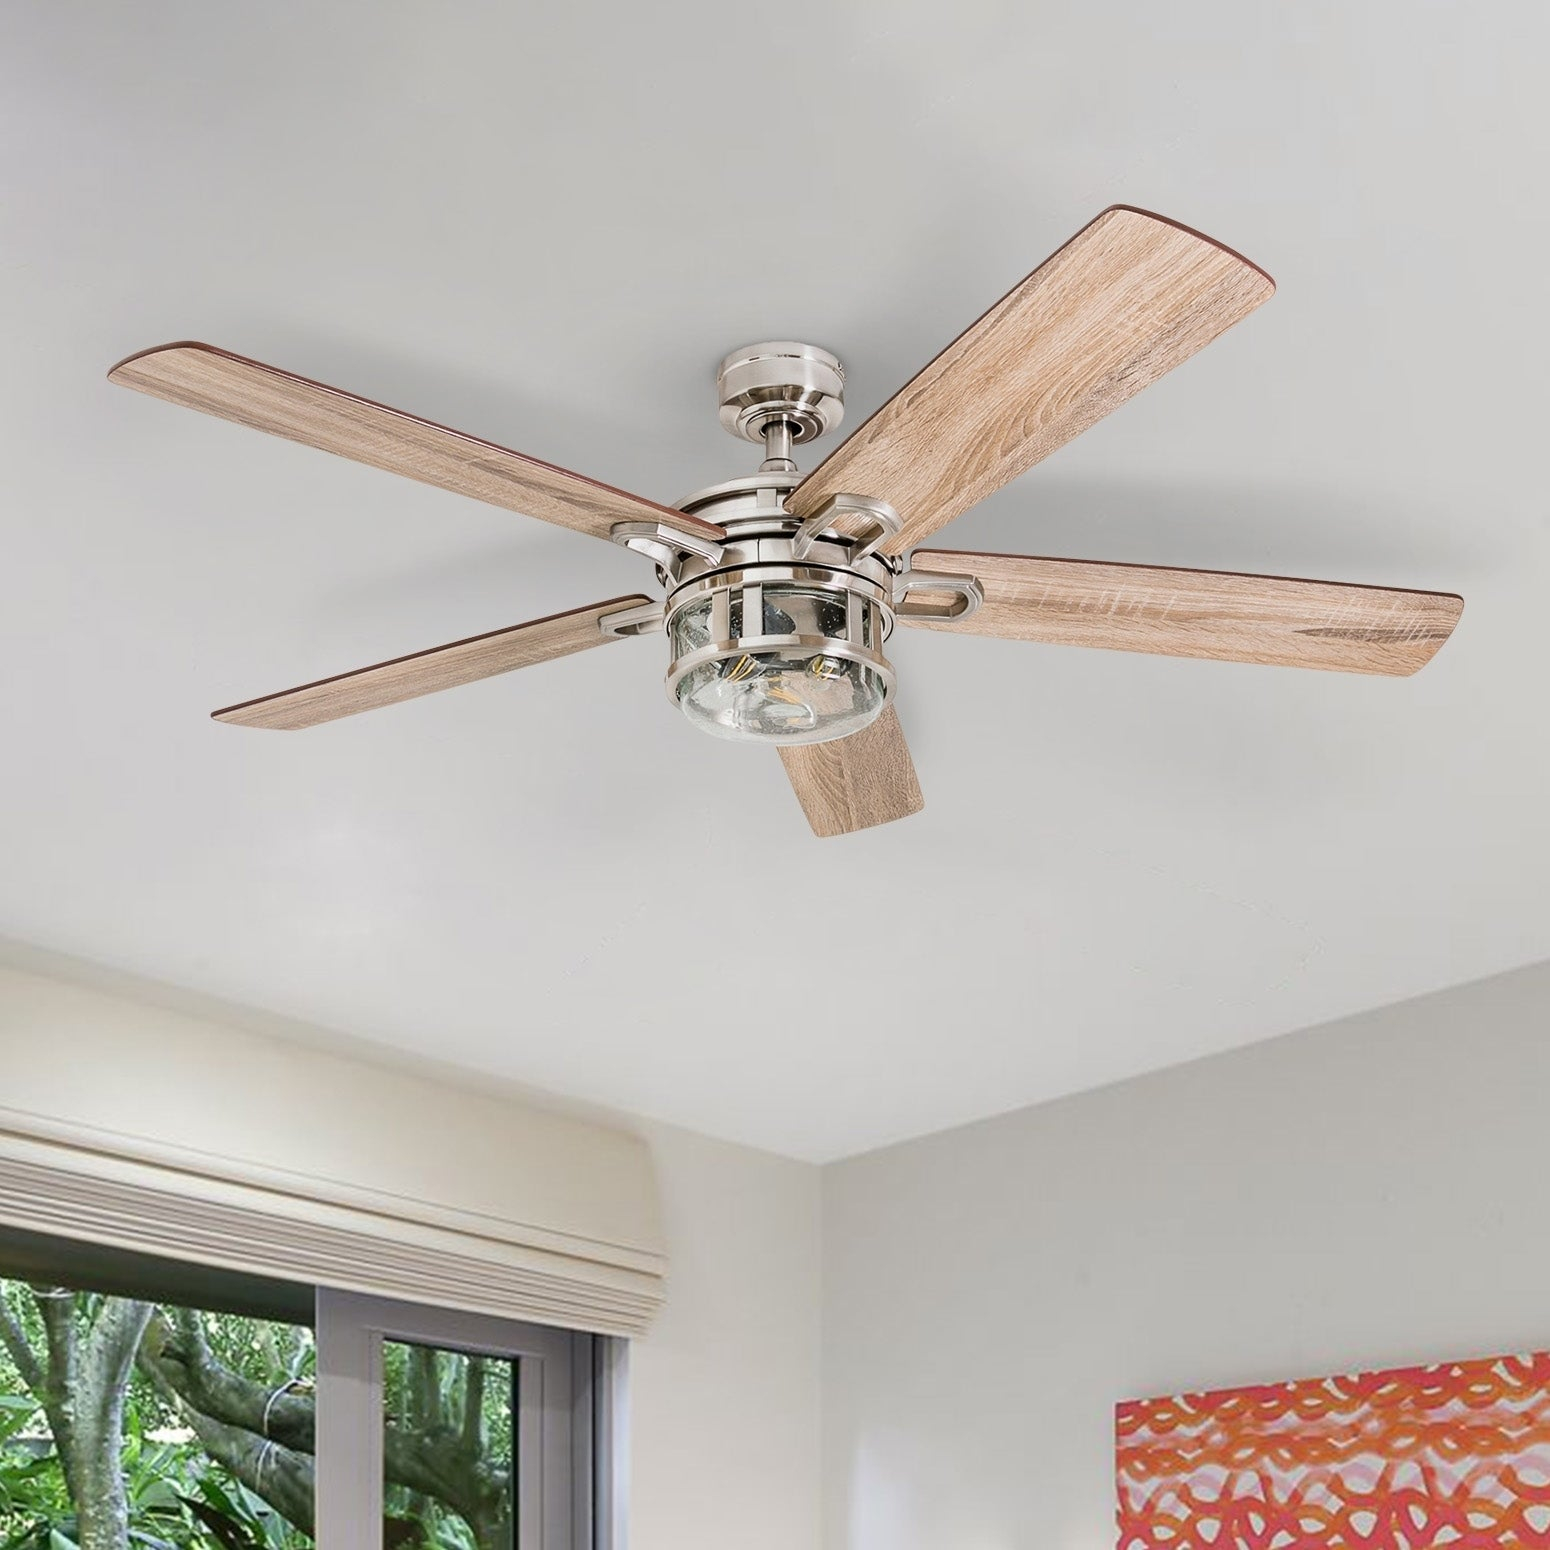 Honeywell Bontera Craftsman Led Remote Control Ceiling Fan Seeded Glass Fixture Brushed Nickel pertaining to measurements 1550 X 1550